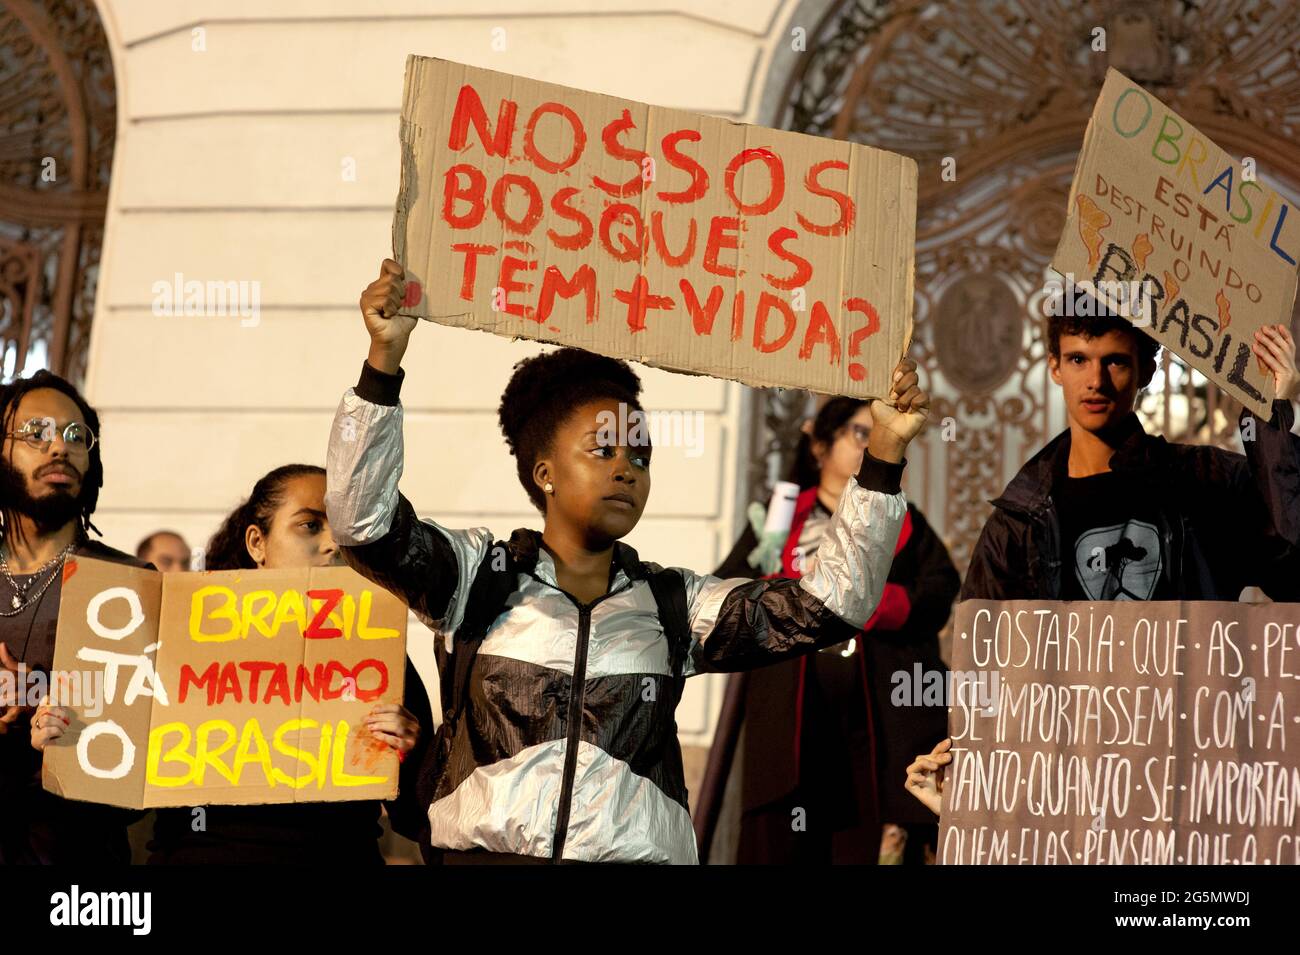 Rio de Janeiro - August 23, 2019: Demonstrators holding placards with slogans such as “Brazil is killing Brazil” protest against the Amazon fires. Stock Photo